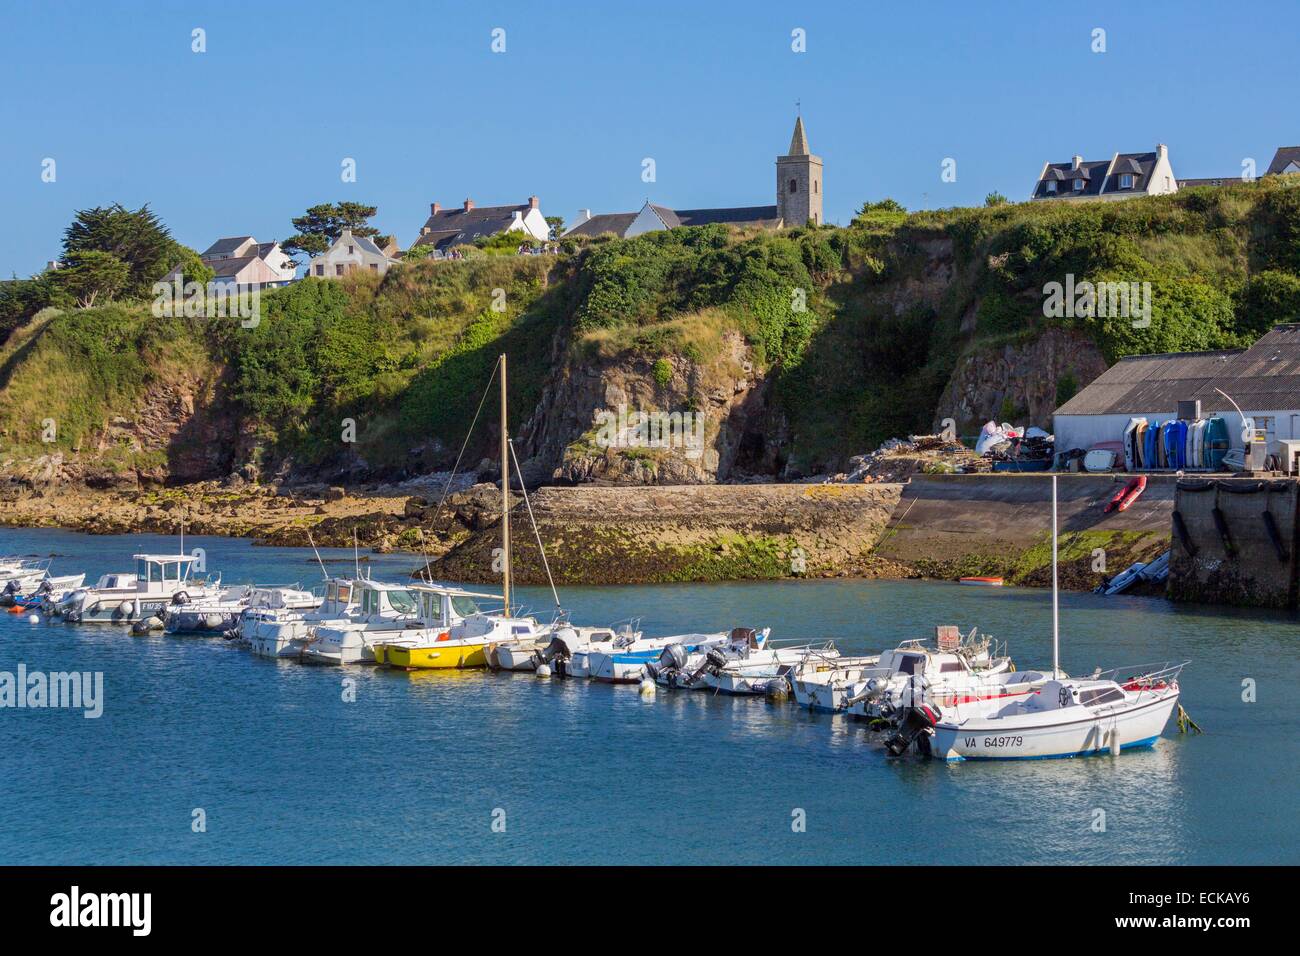 France, Morbihan, the Gulf of Morbihan, the Ponant islands, the island of Houat, the port and the village Stock Photo